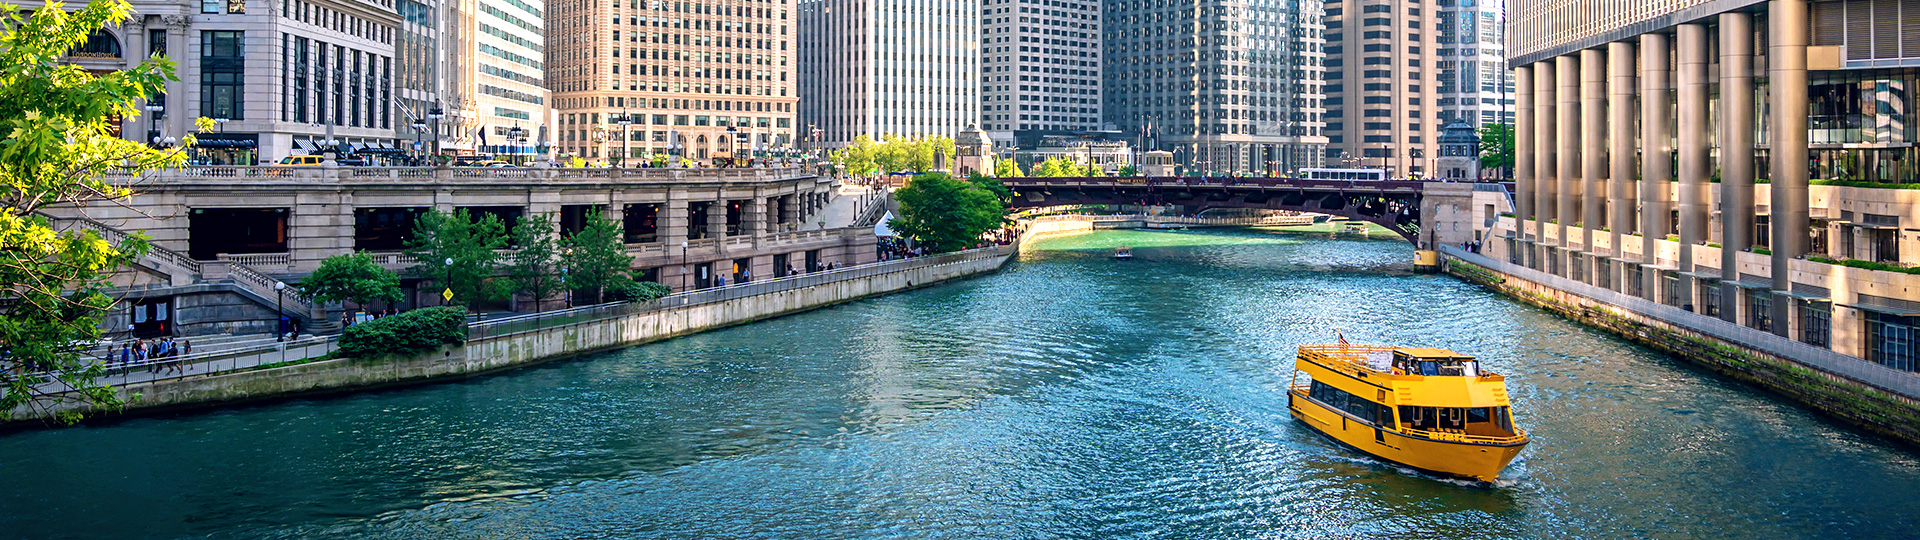 Attractions of Chicago